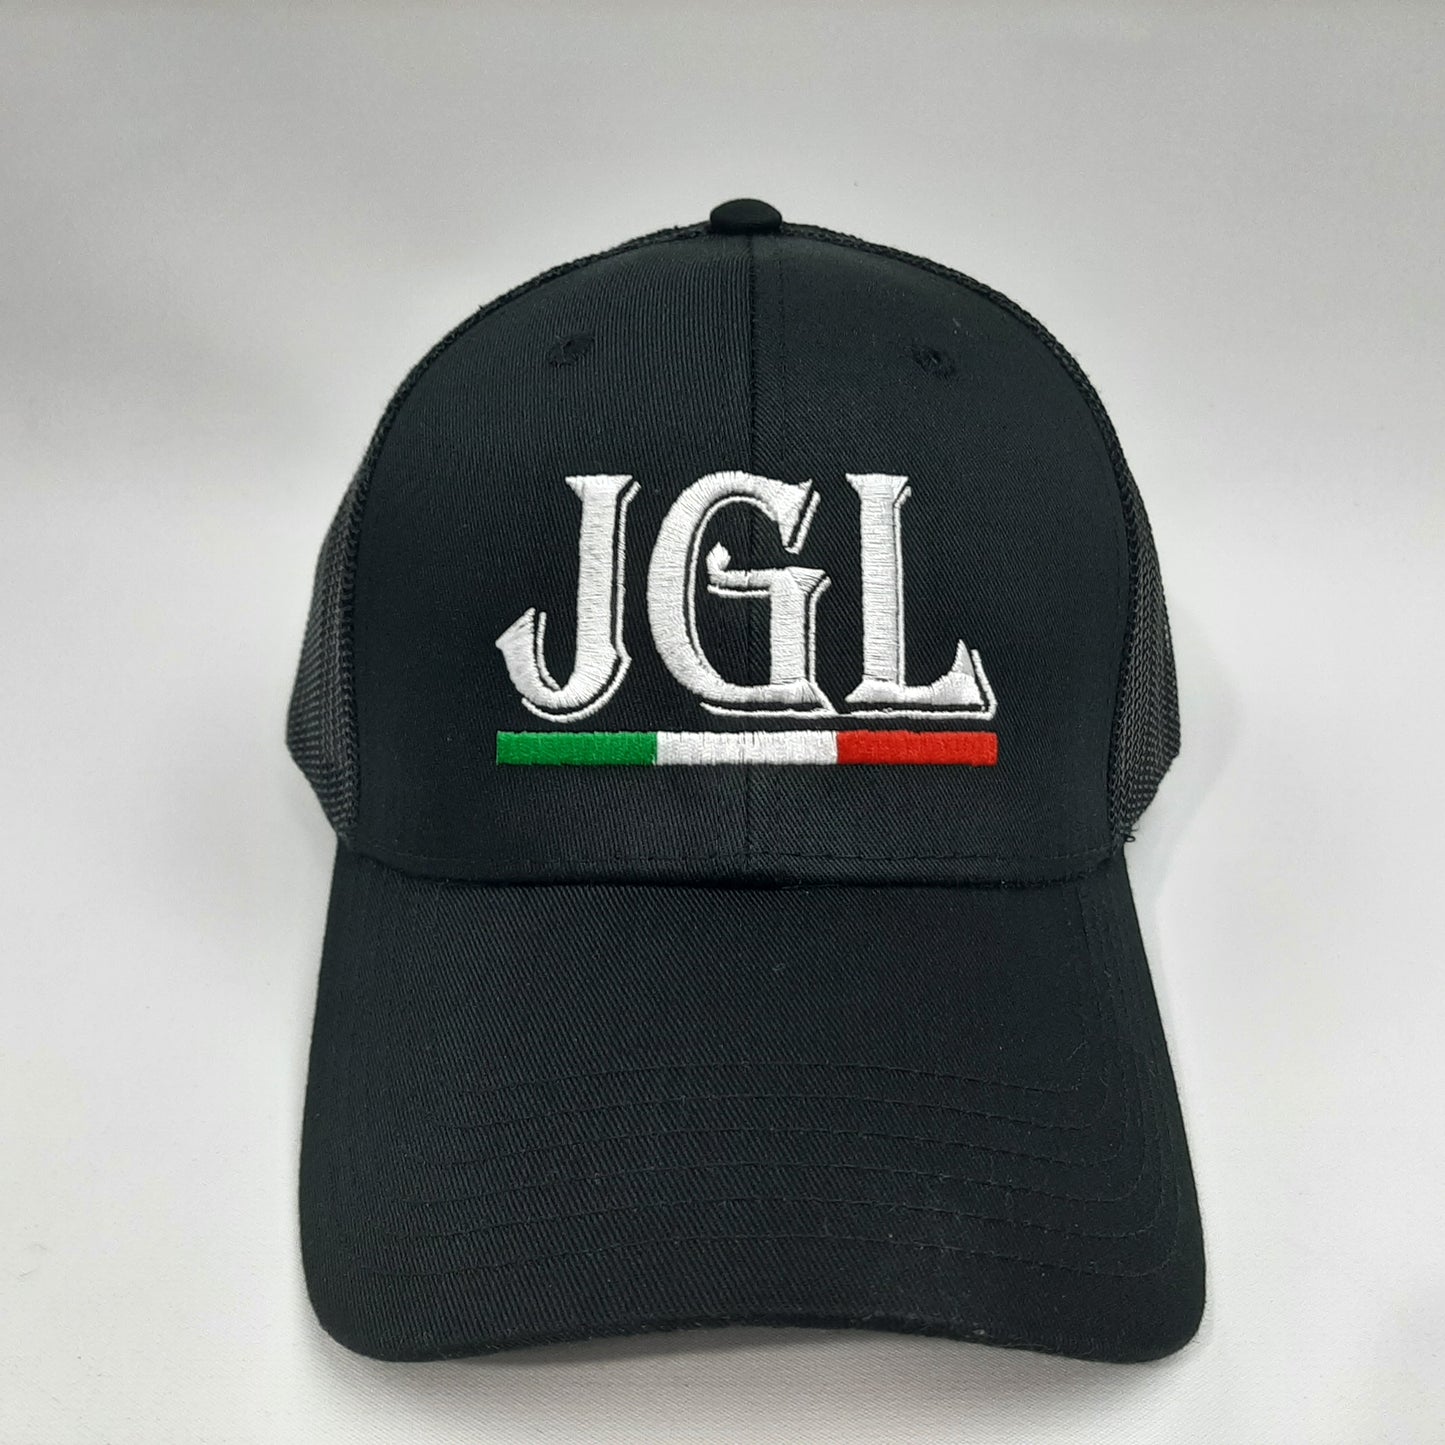 JGL Embroidered Patch Curved Bill Mesh Snapback Cap Hat Black